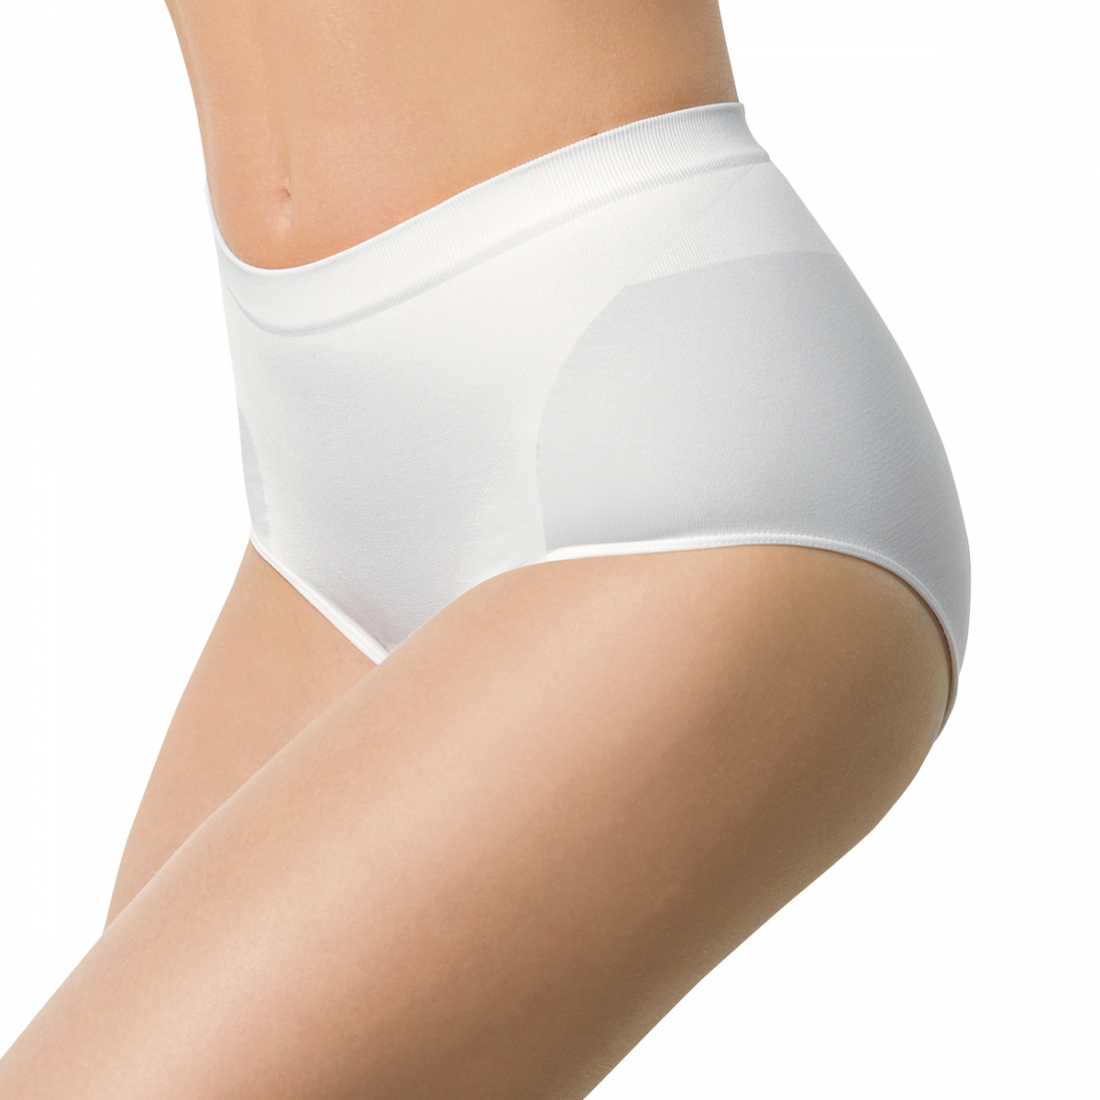 Women's 'Silhouette Extra' Shaping Briefs